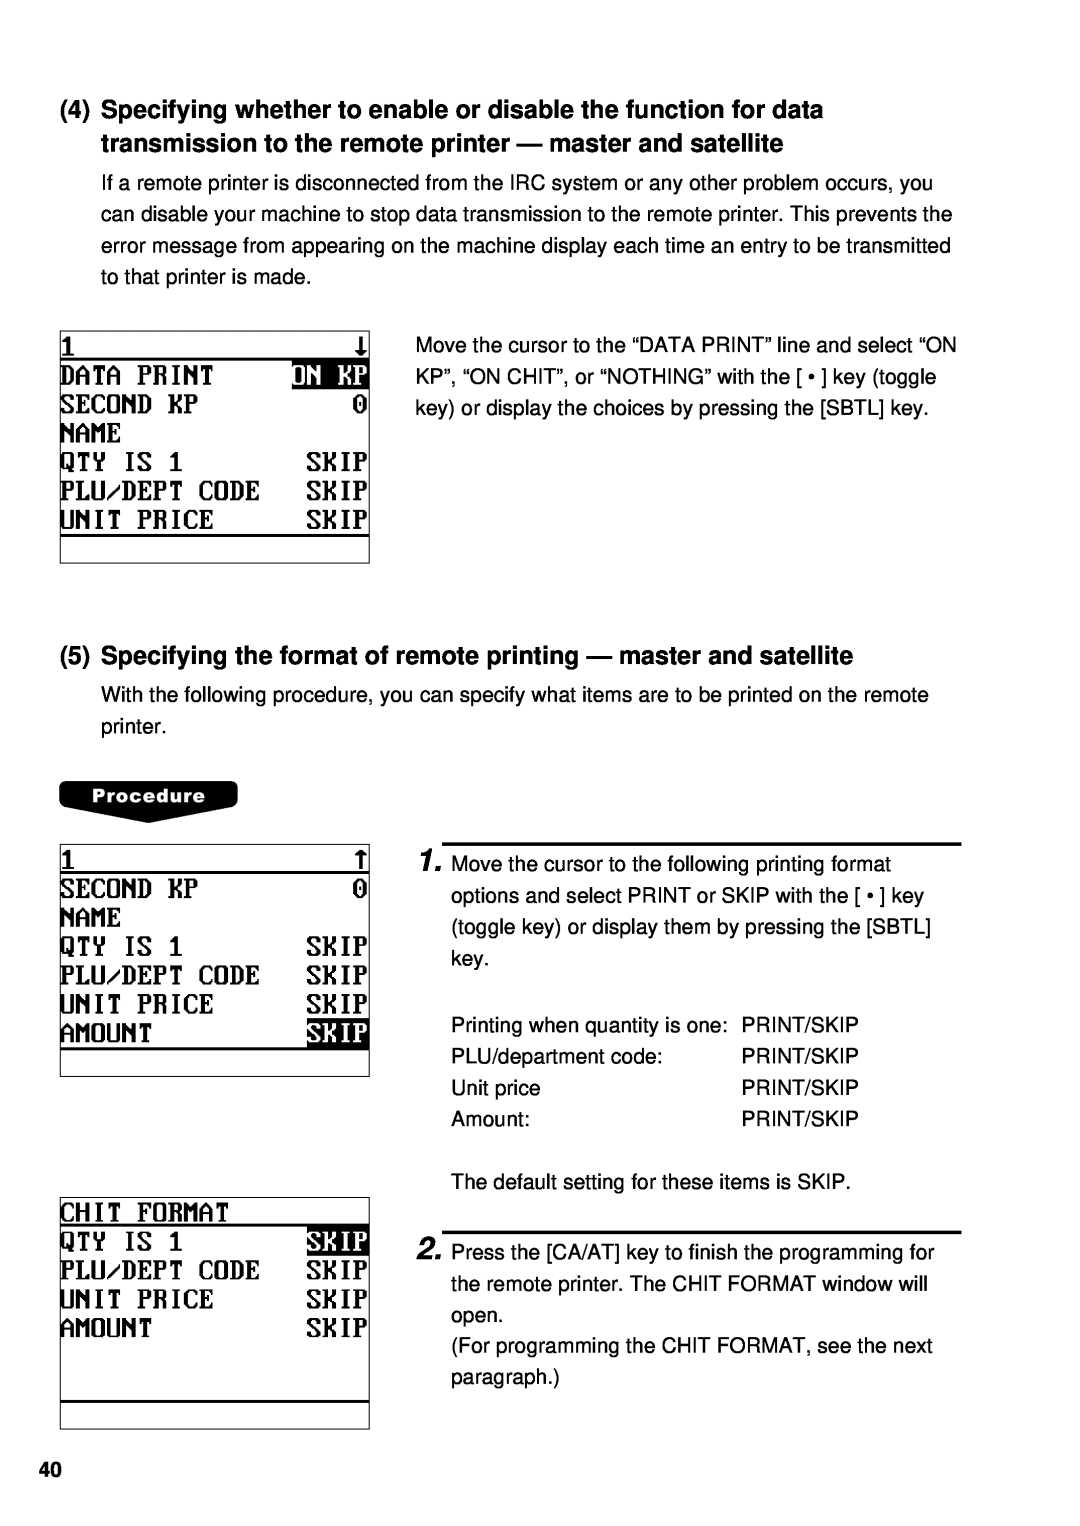 Sharp UP-700, UP-600 instruction manual Printing when quantity is one: PRINT/SKIP 